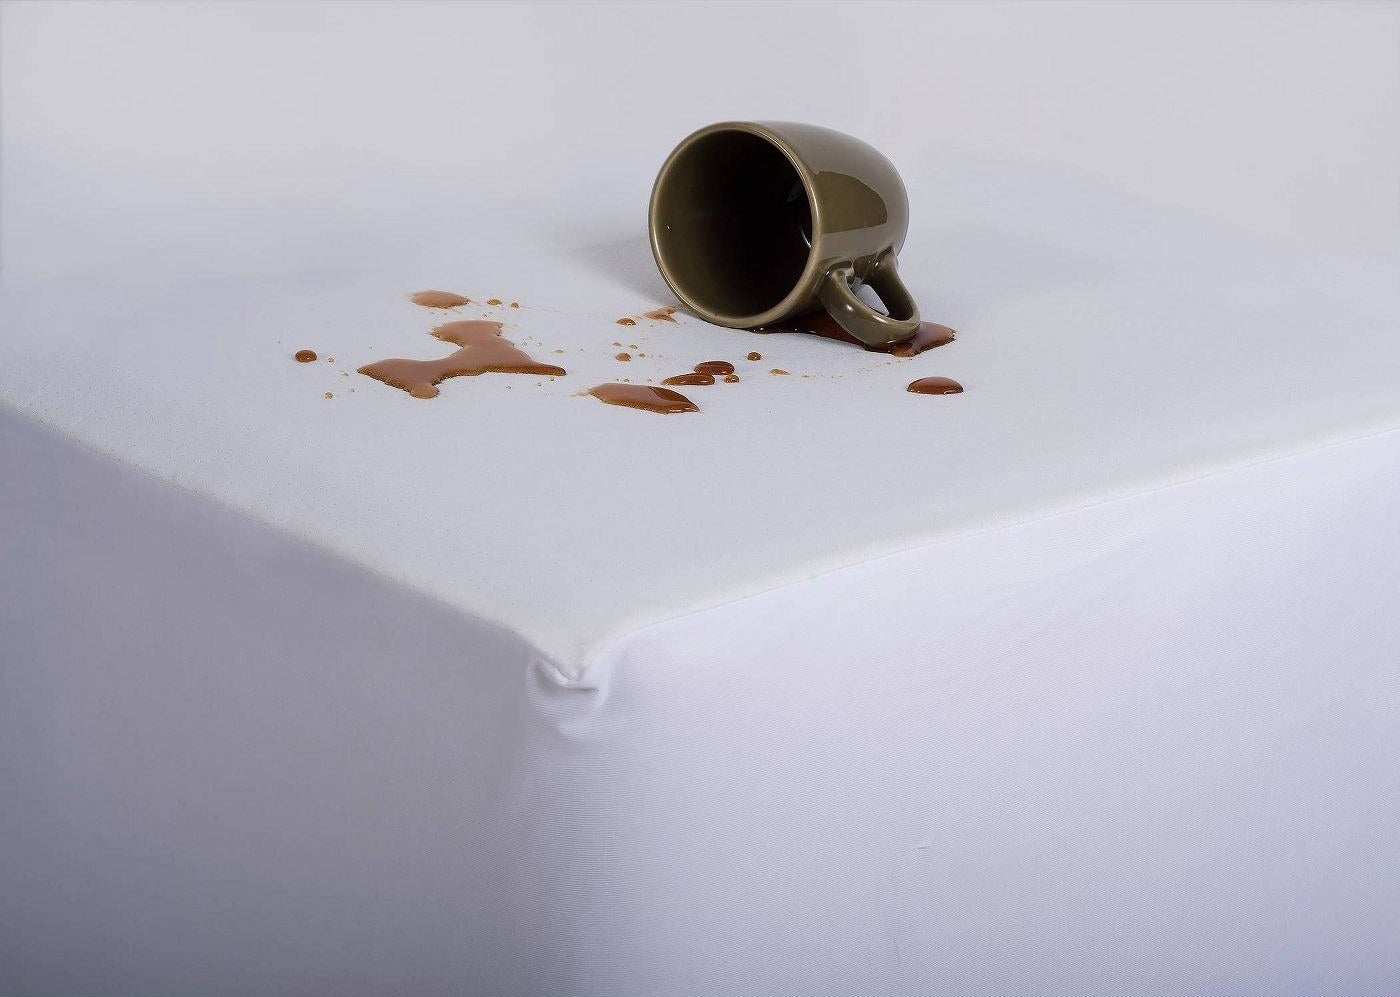 Coffee spill on matress cover